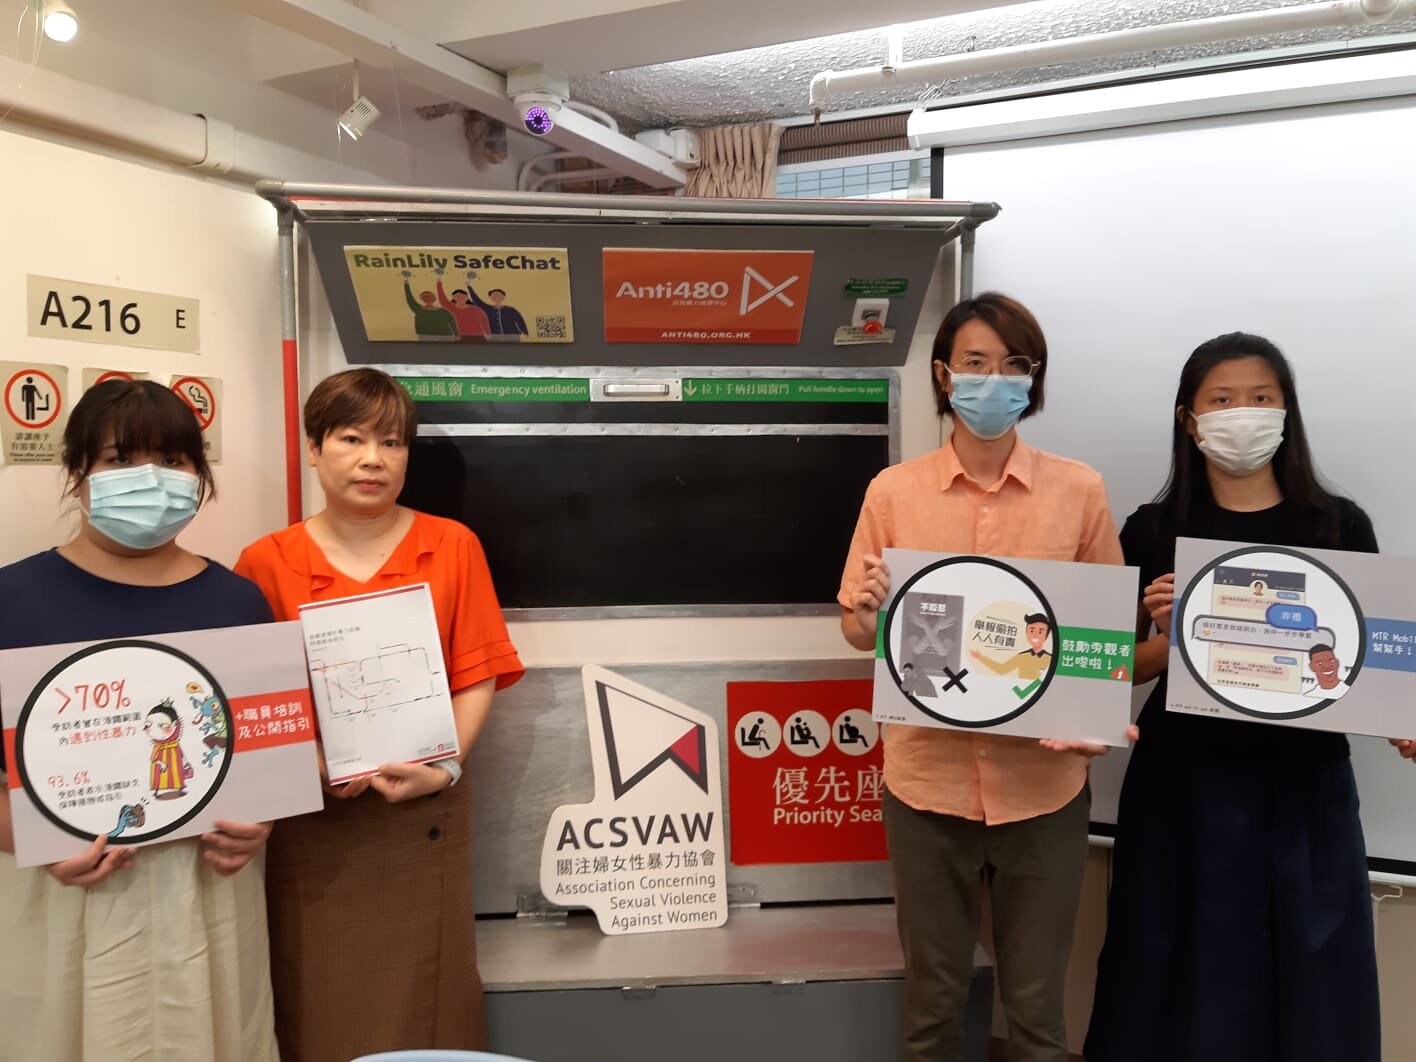  From left to right: Members of The Group Lau Chi Ting, Executive Director of the Association Linda Wong, Community Organiser Oskar Wan, and Members of The Group Wong Ka Kee 